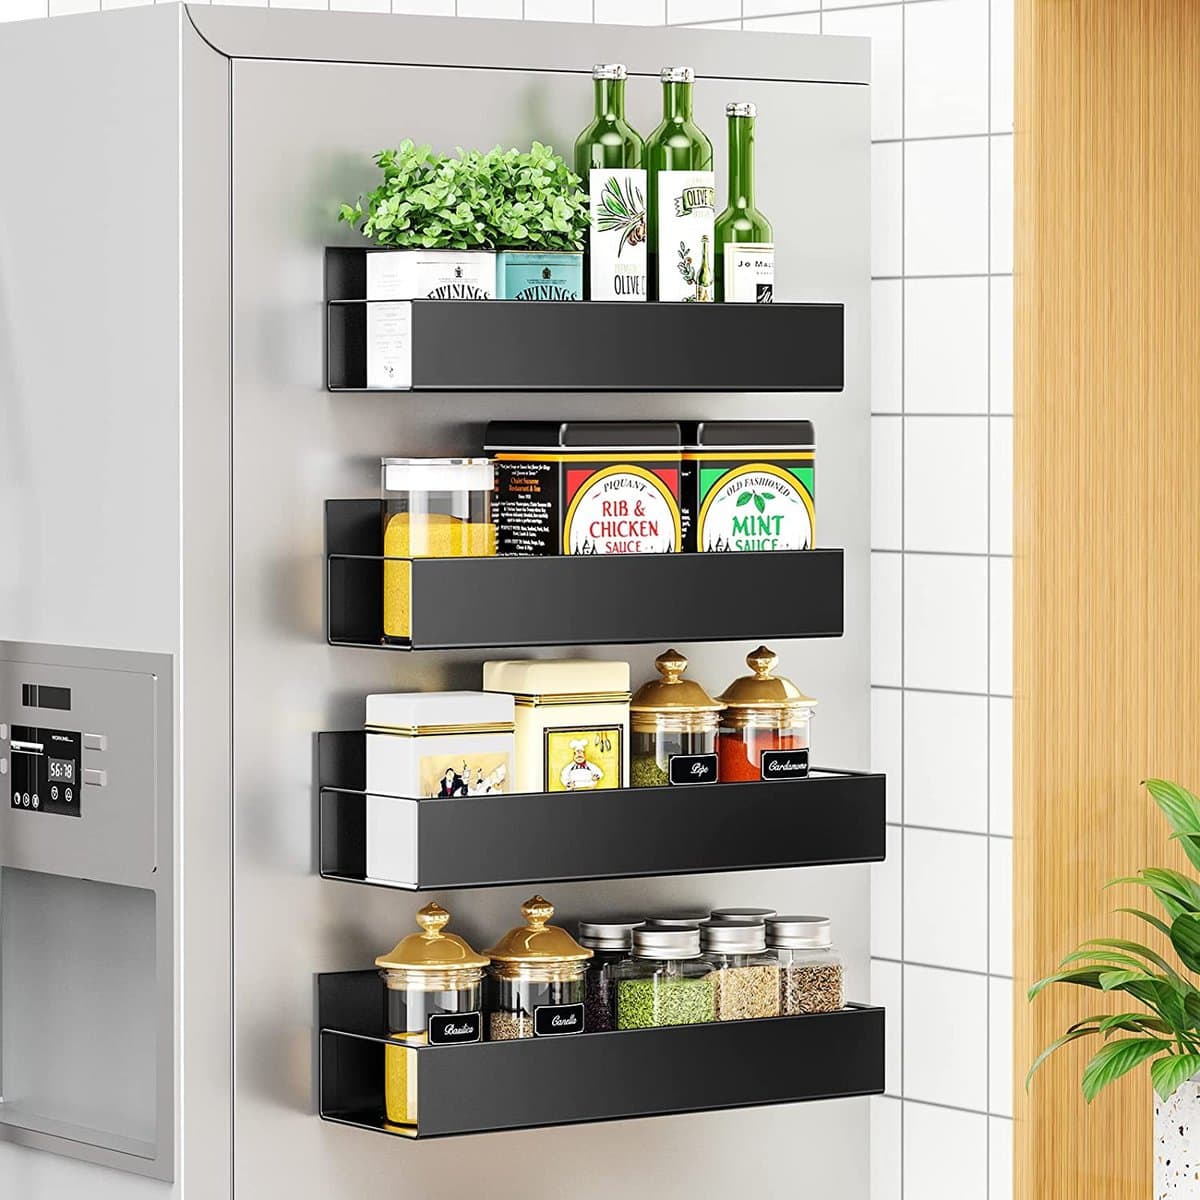 Kitchen organization ideas - Four black metal magnetic racks on the side of a fridge holding several spices and cooking essentials.